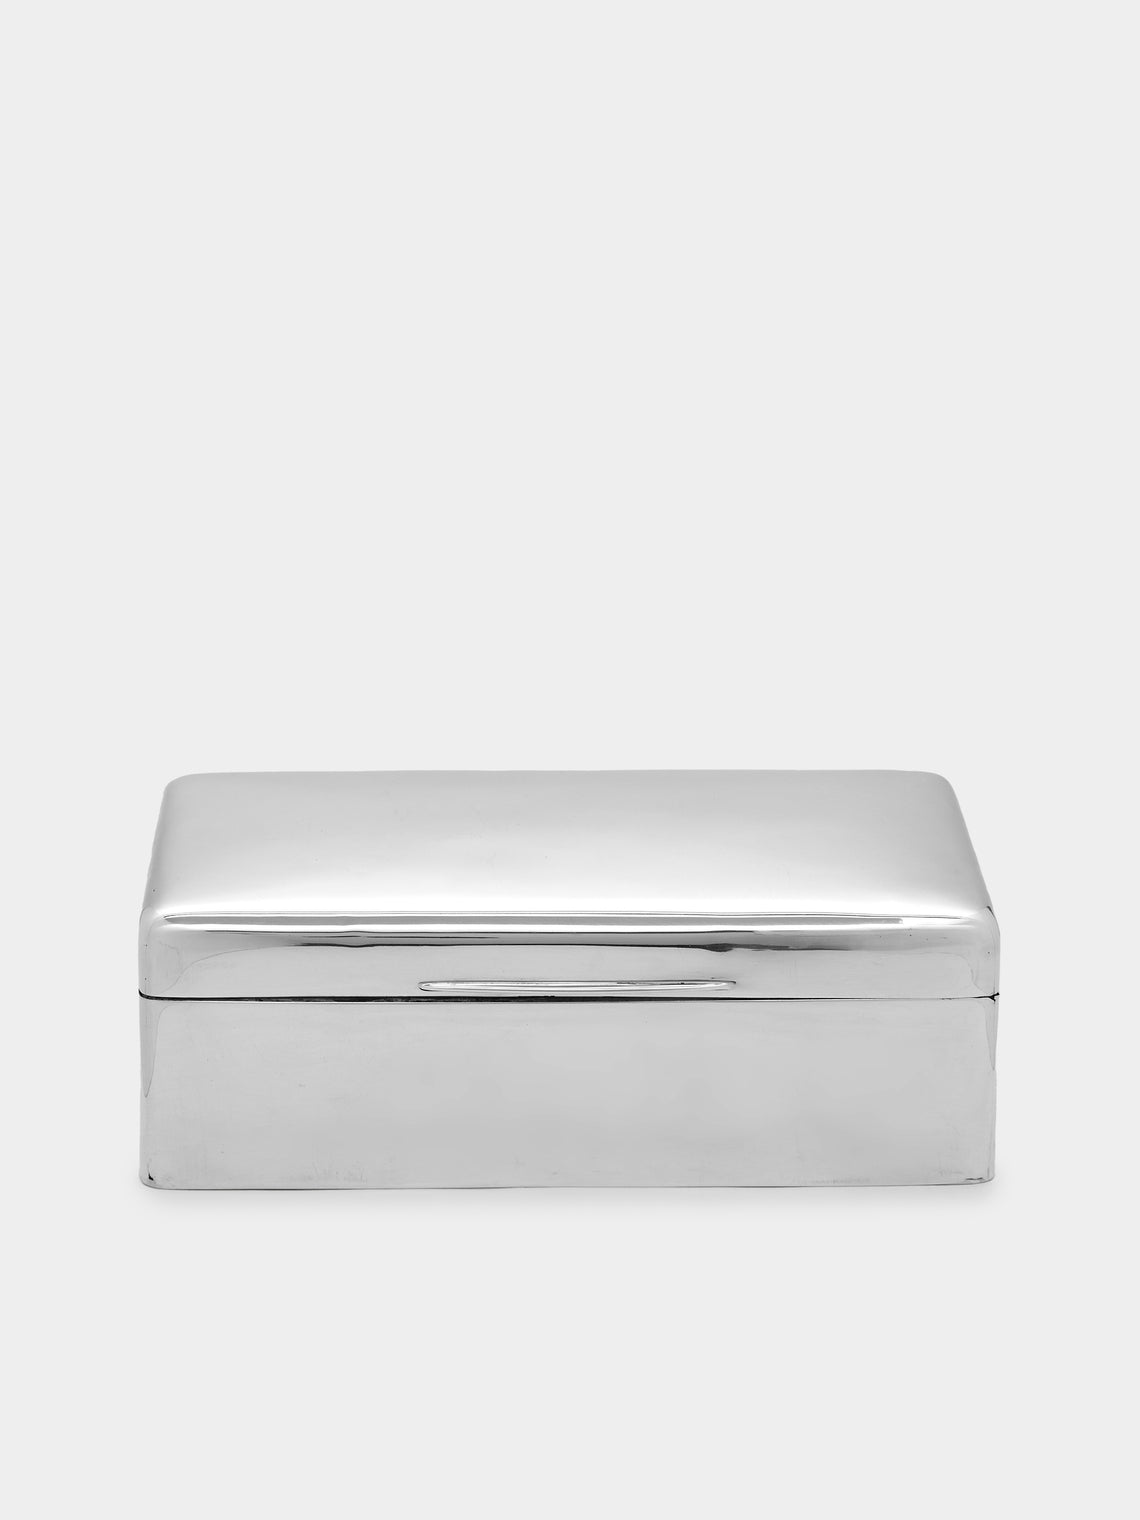 Antique and Vintage - 1900s Silver Box -  - ABASK - 